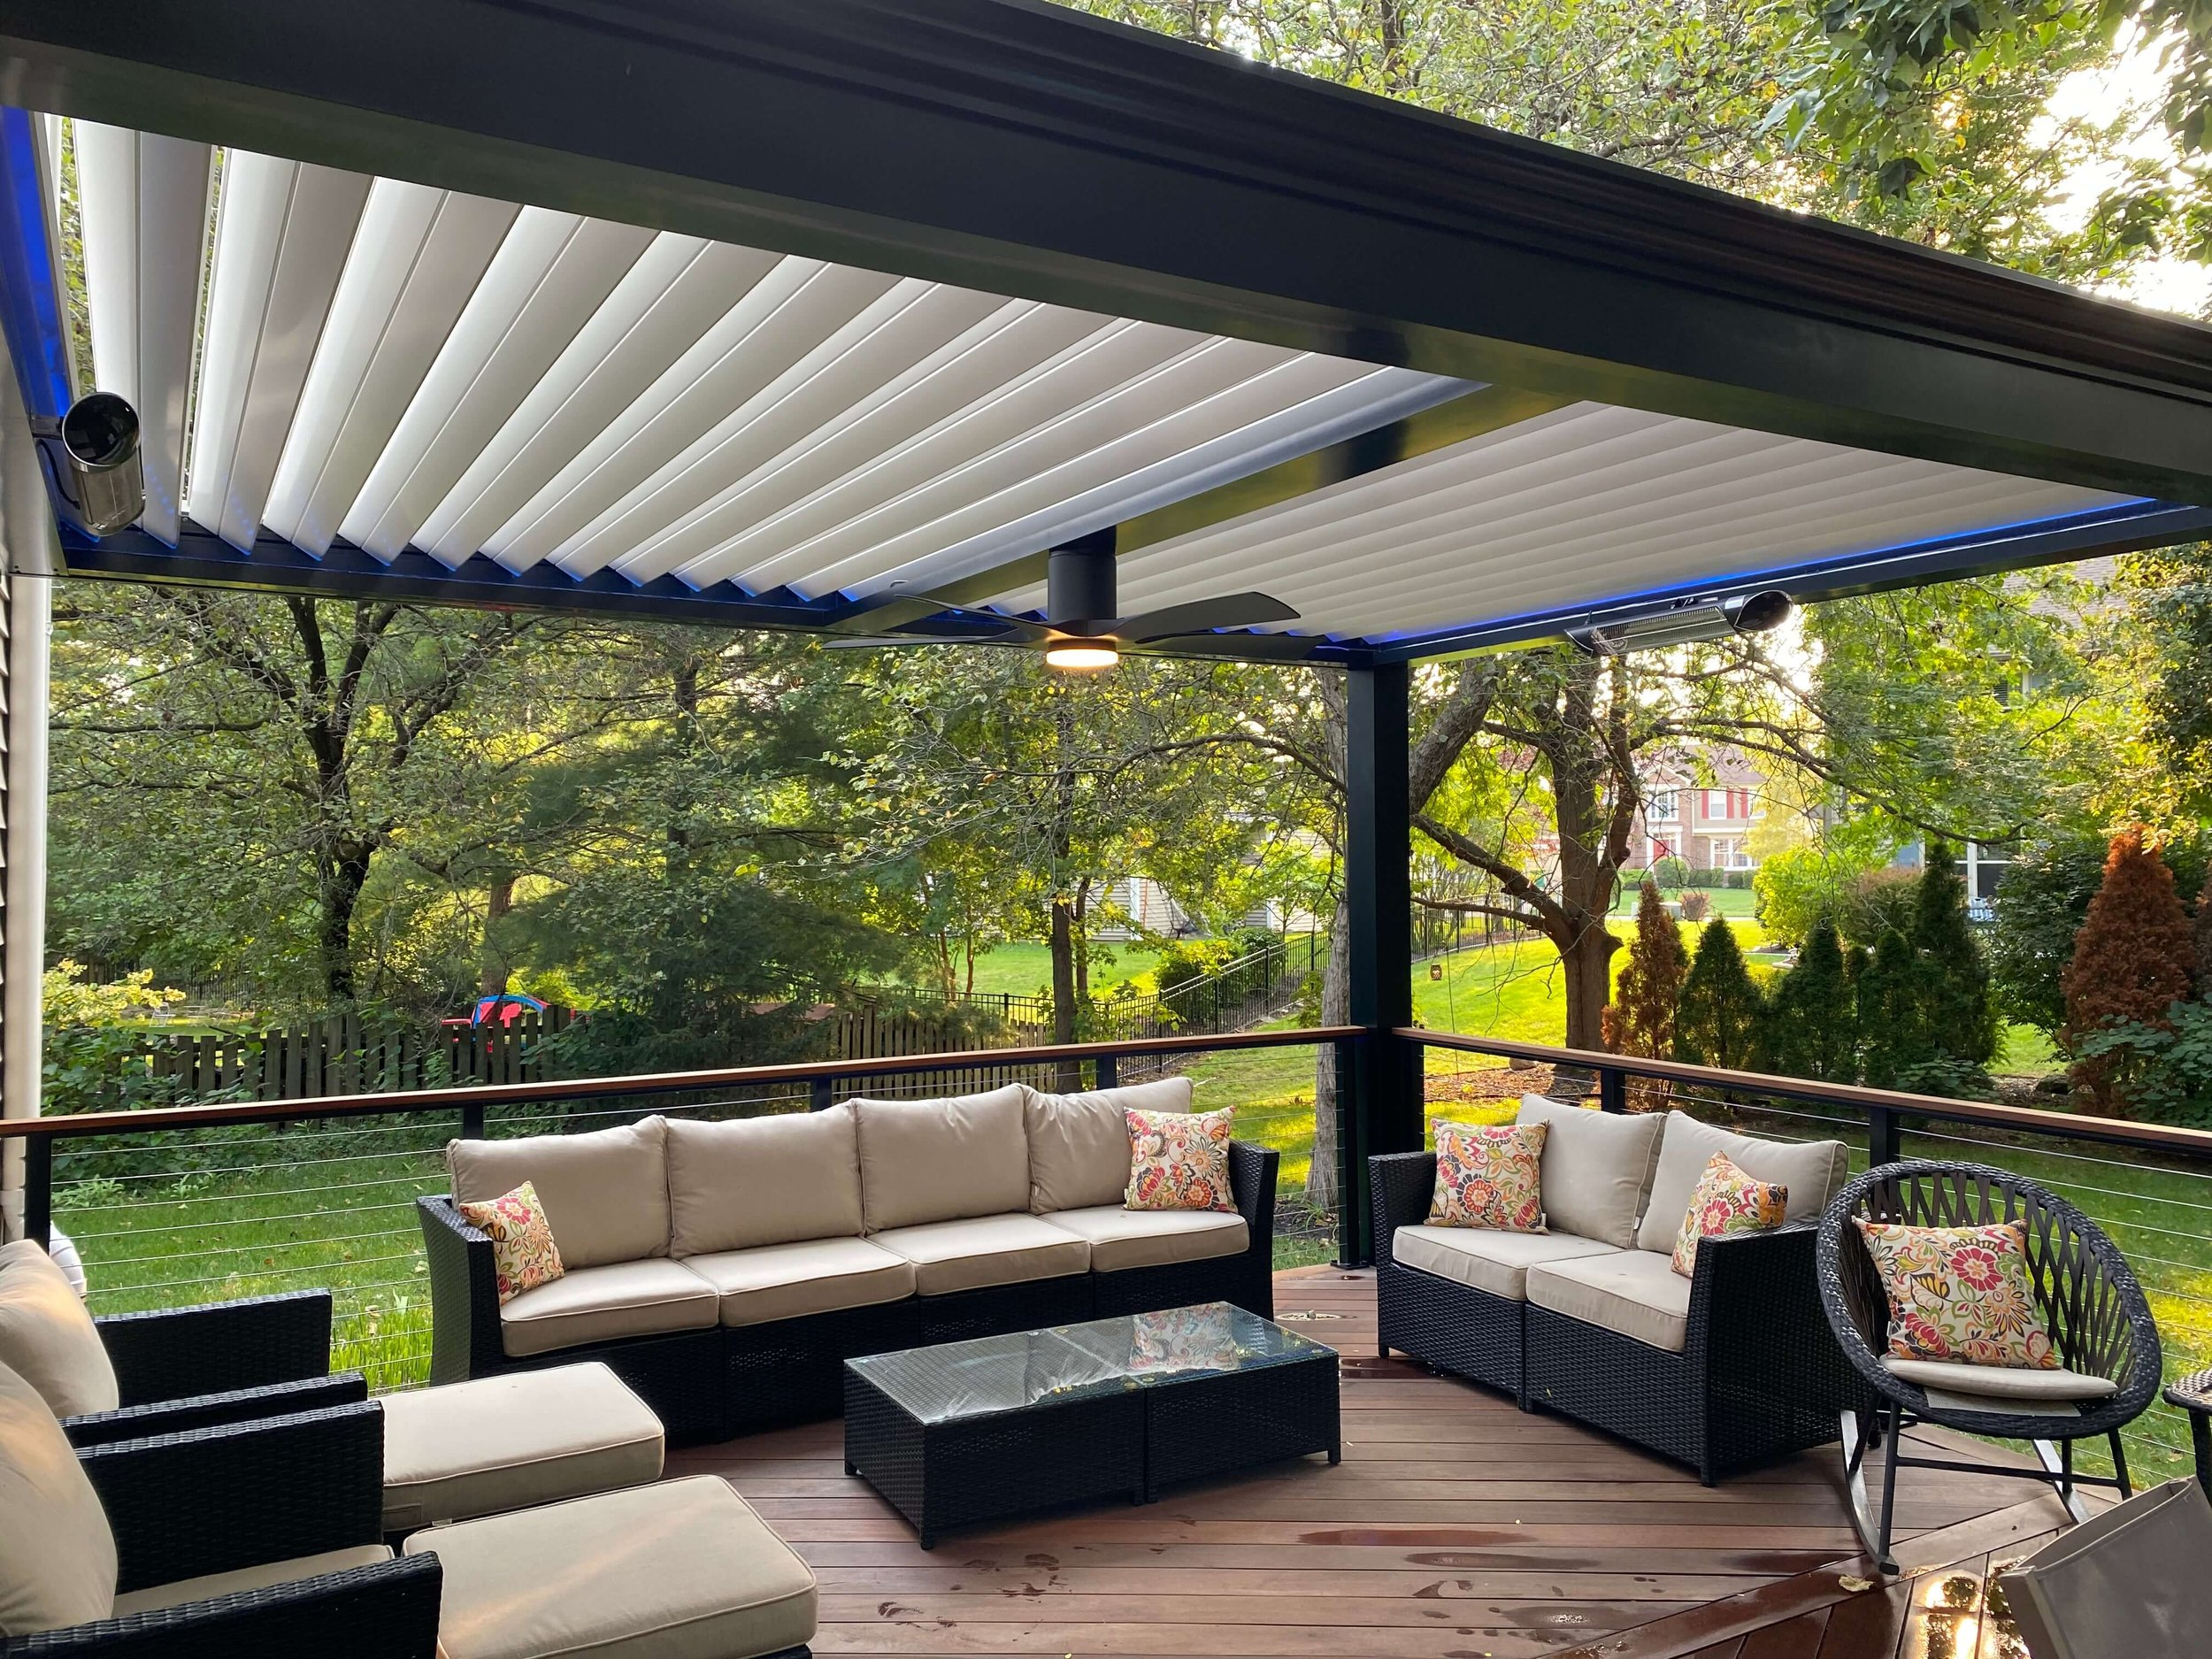 Outdoor Living made better with furniture features under pergola with louvered roof